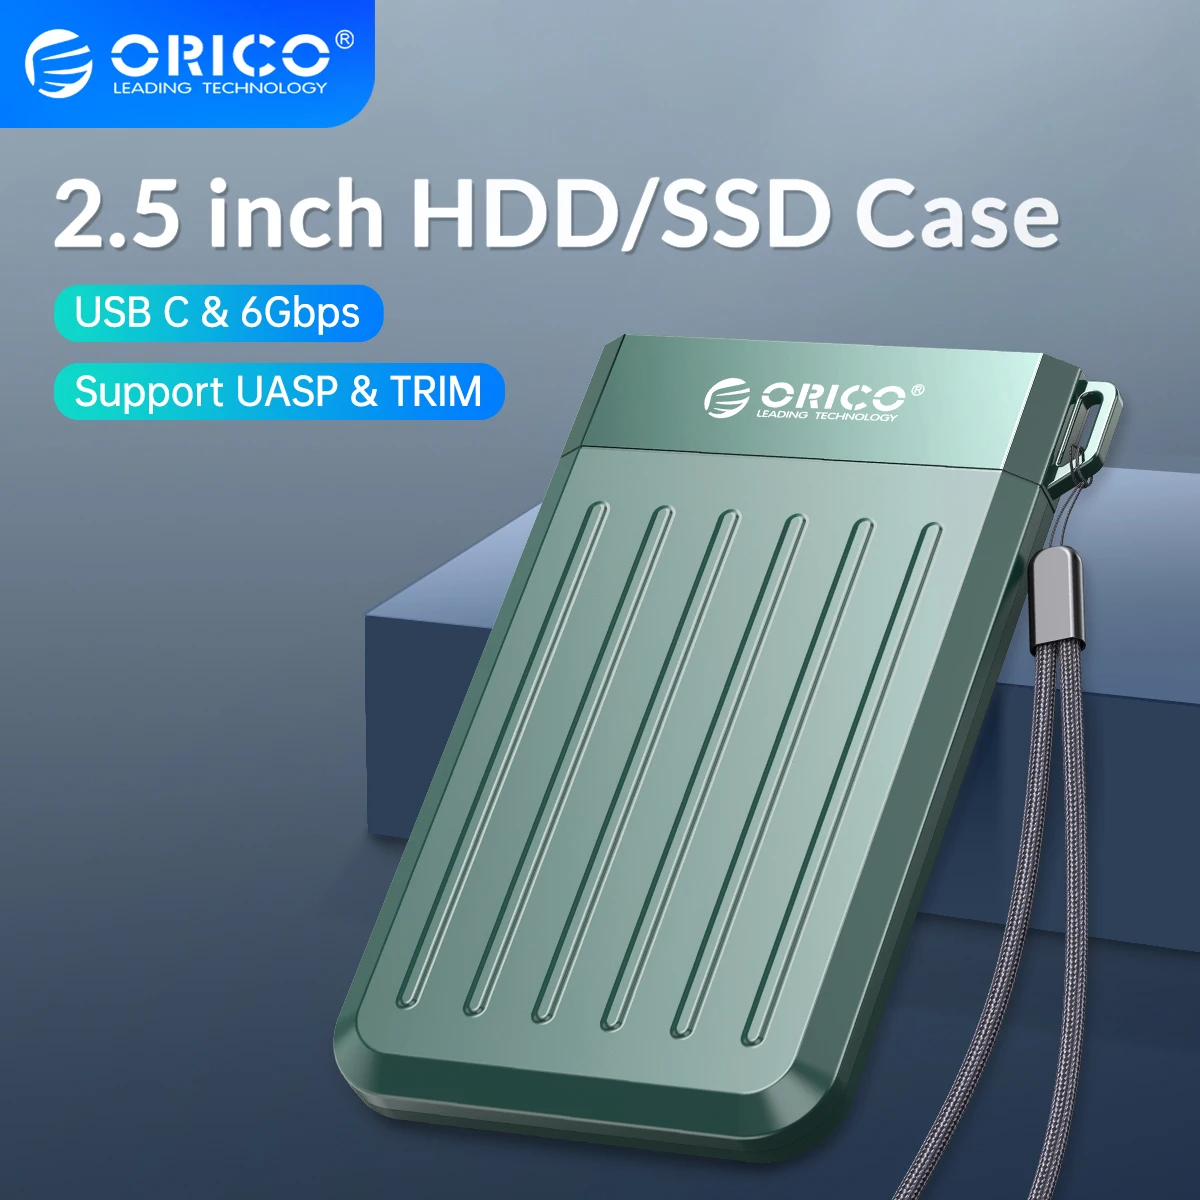 

ORICO External Hard Drive Box USB C 6Gbps HDD Case 2.5 inch SATA to USB 3.1 Hard Drive Enclosure for 2.5" SSD HDD Support UASP